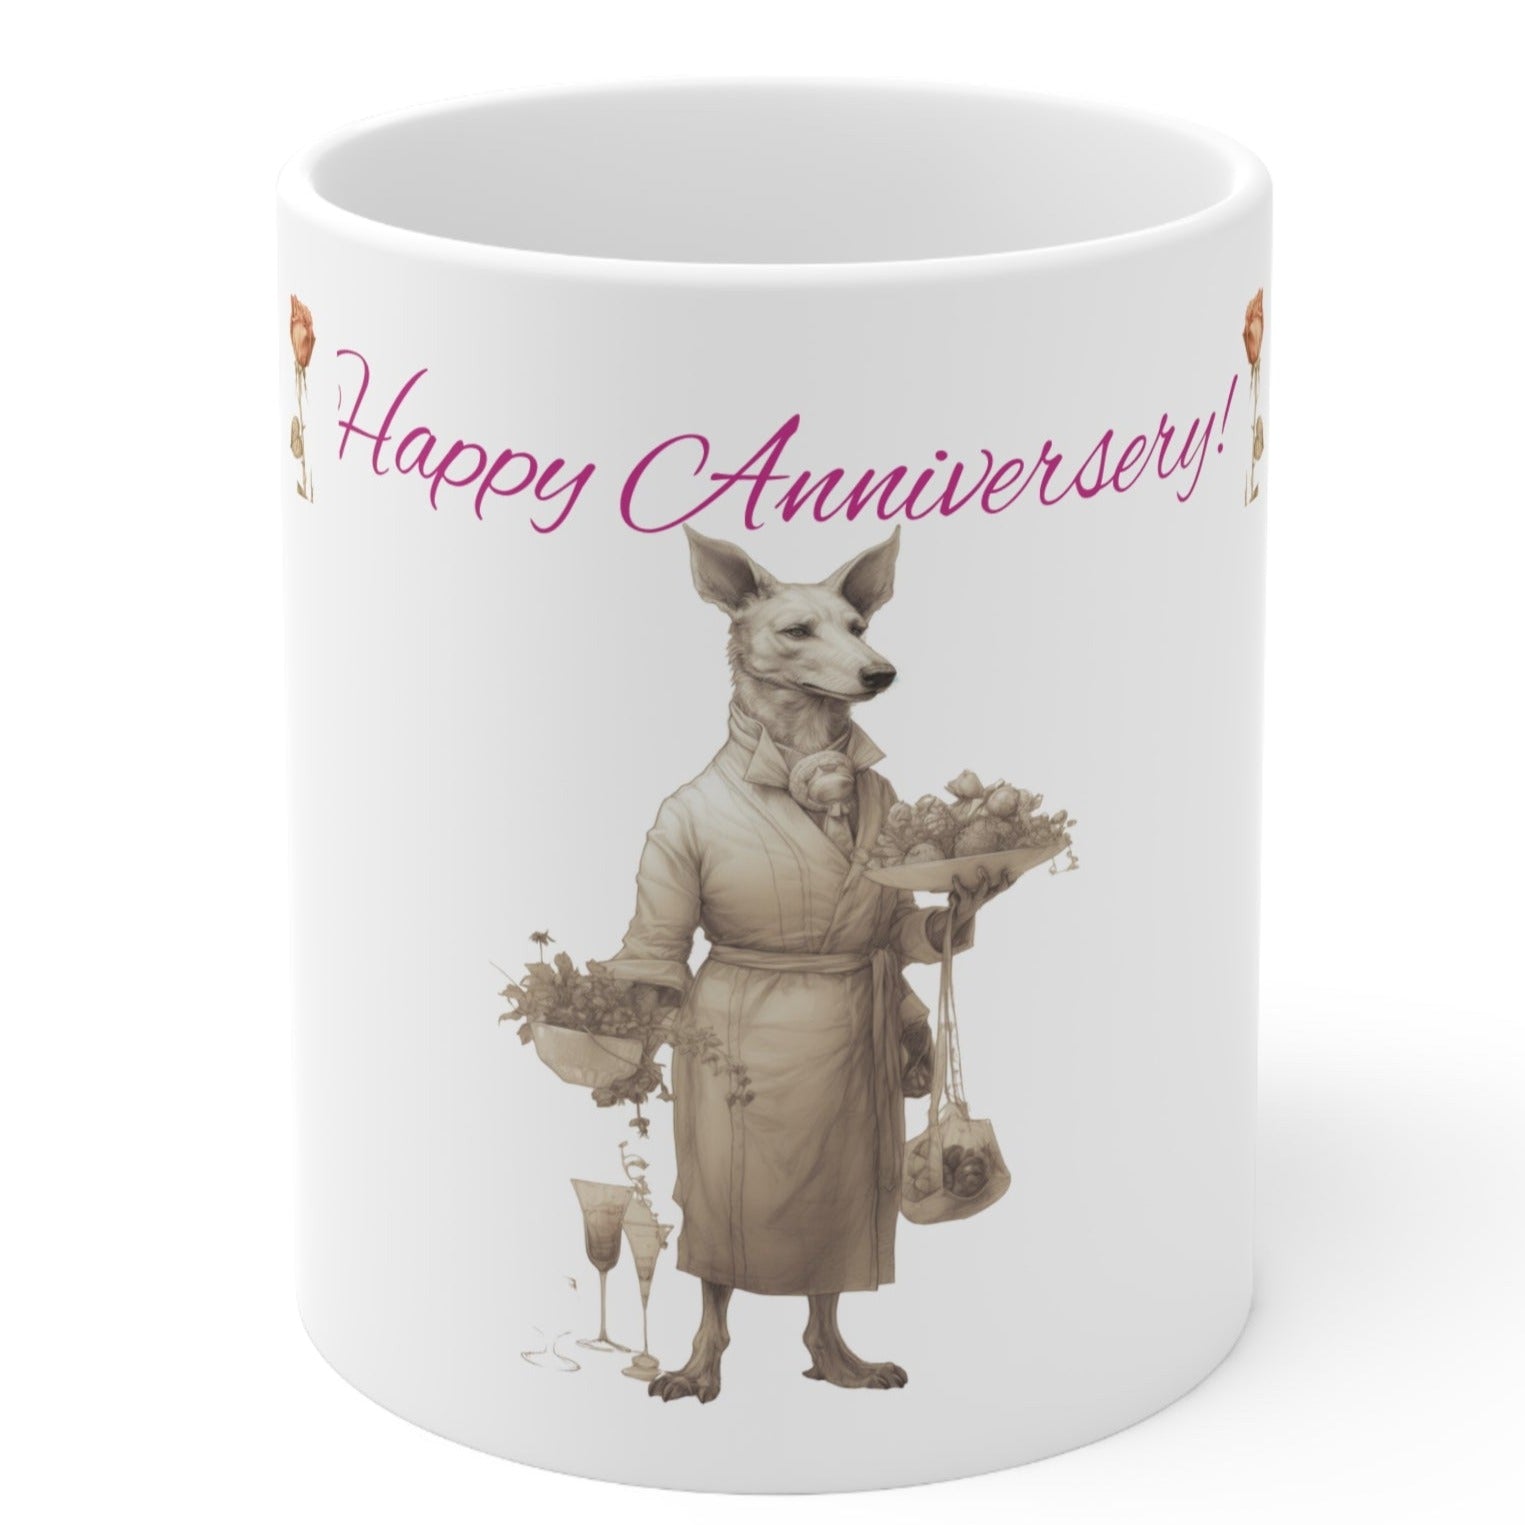 Beautiful Coffee Mug of a Handsome Dog in a Distinguished House Robe with Anniversary Gifts--It Says "Happy Anniversary!".